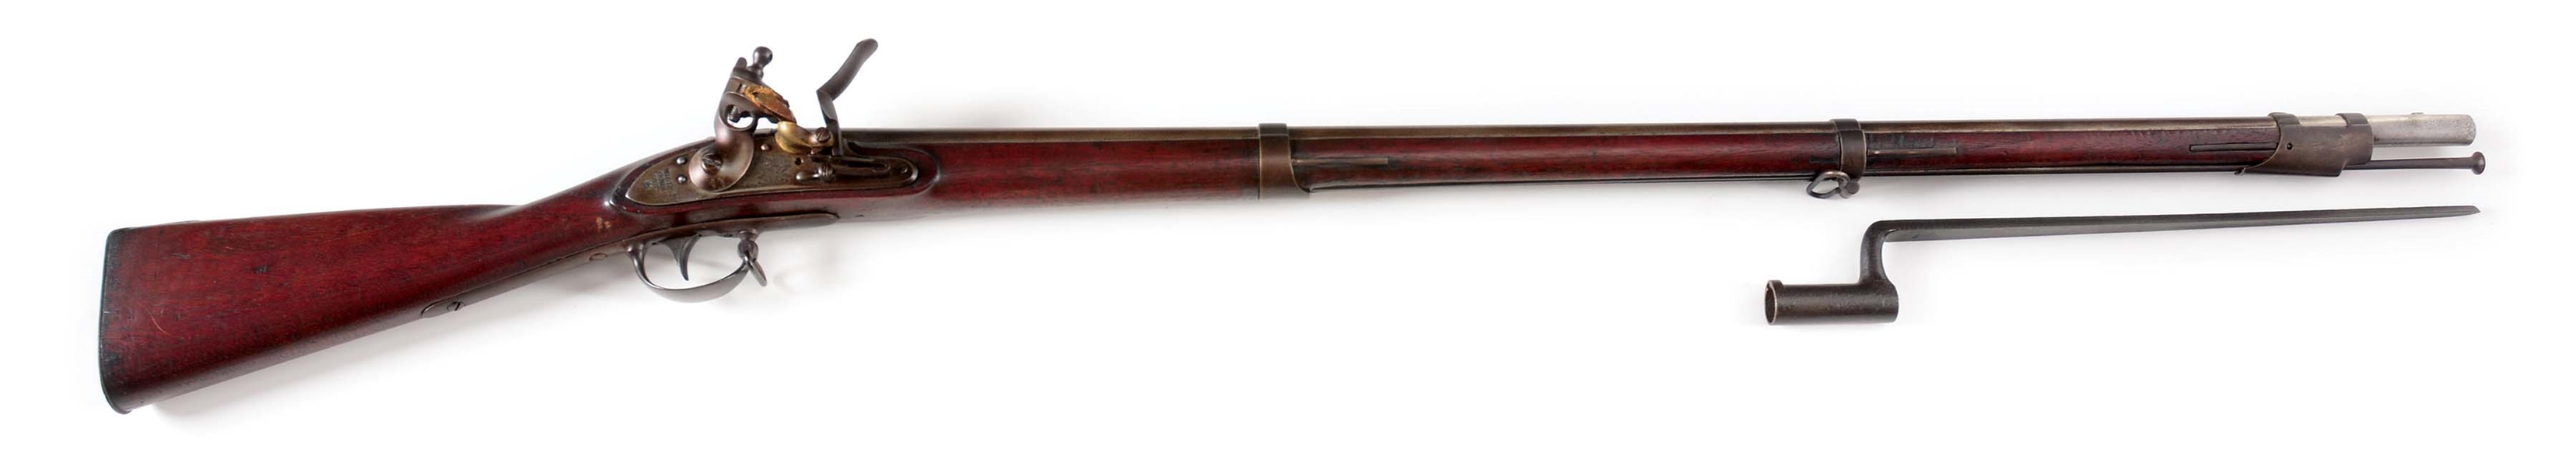 (A) 1816 NATHAN STARR MUSKET.